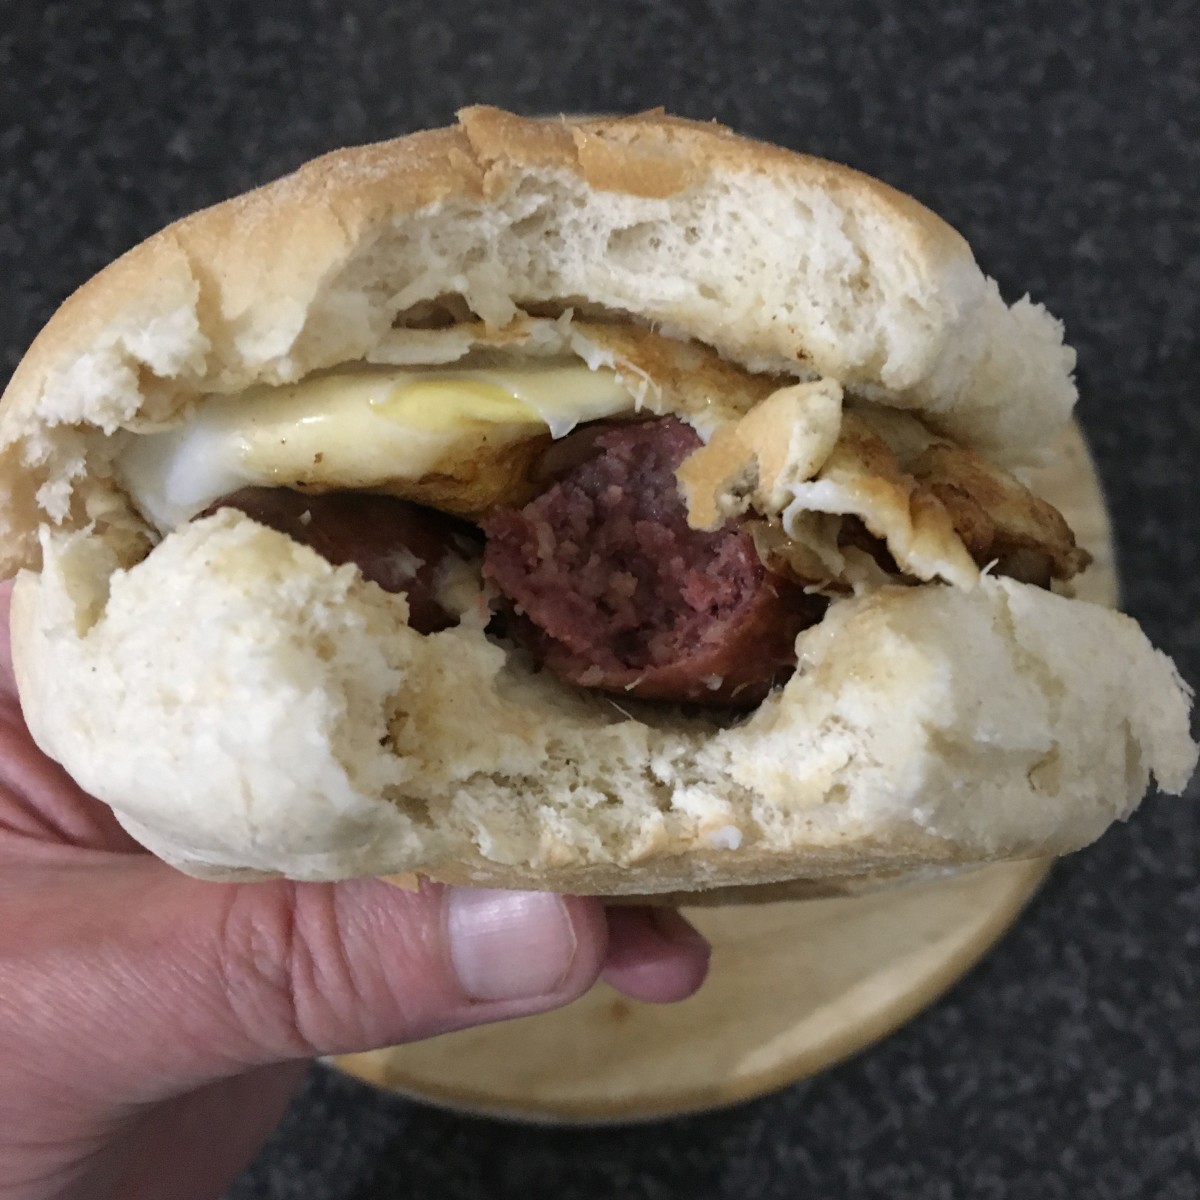 Fried sausage, onion and duck egg on a bread roll